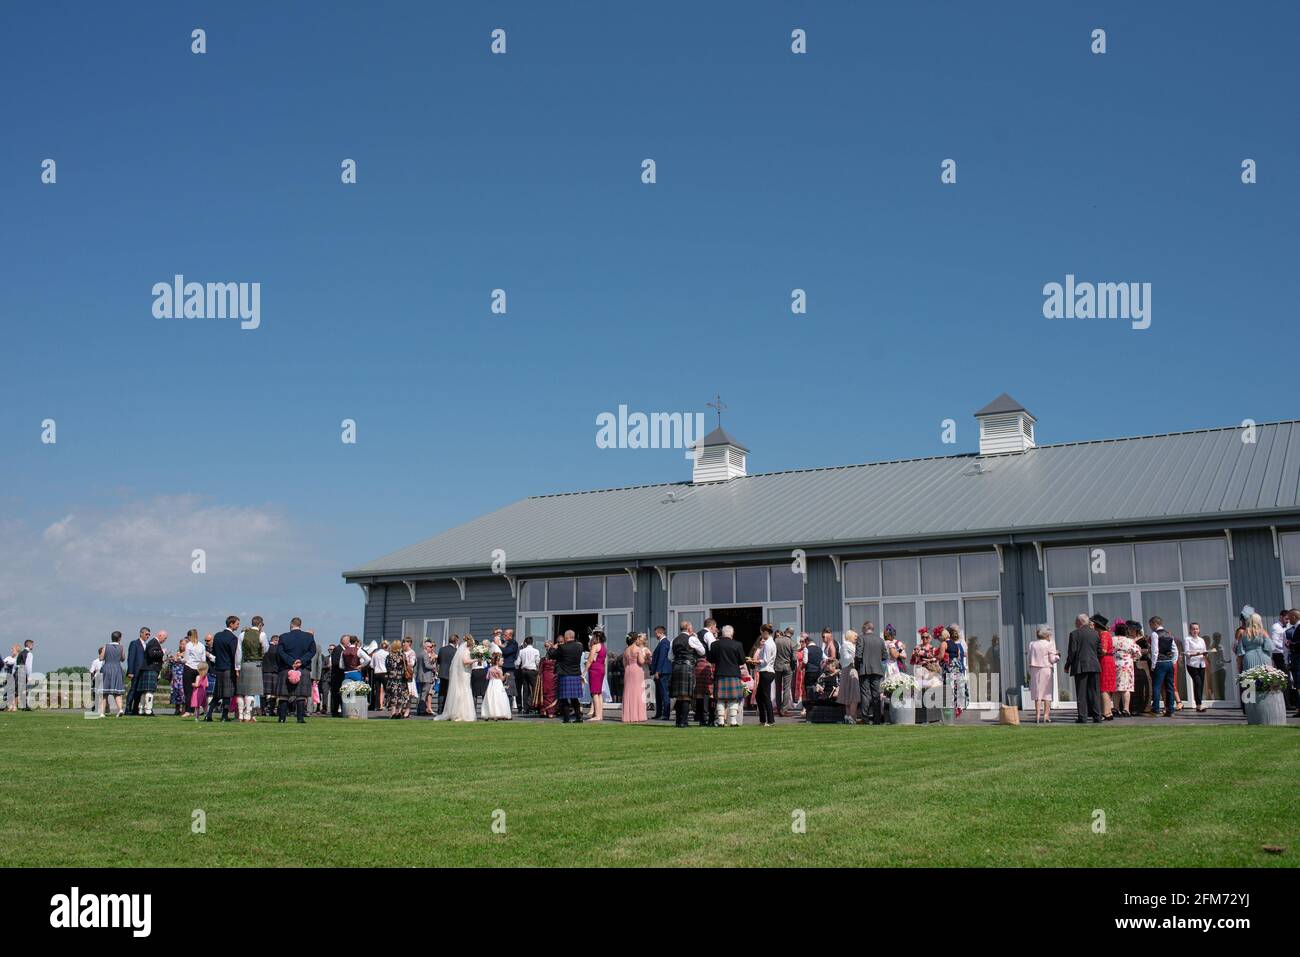 A wedding in progress at Barn of Barra Castle barn in high summer on a sunny day Stock Photo